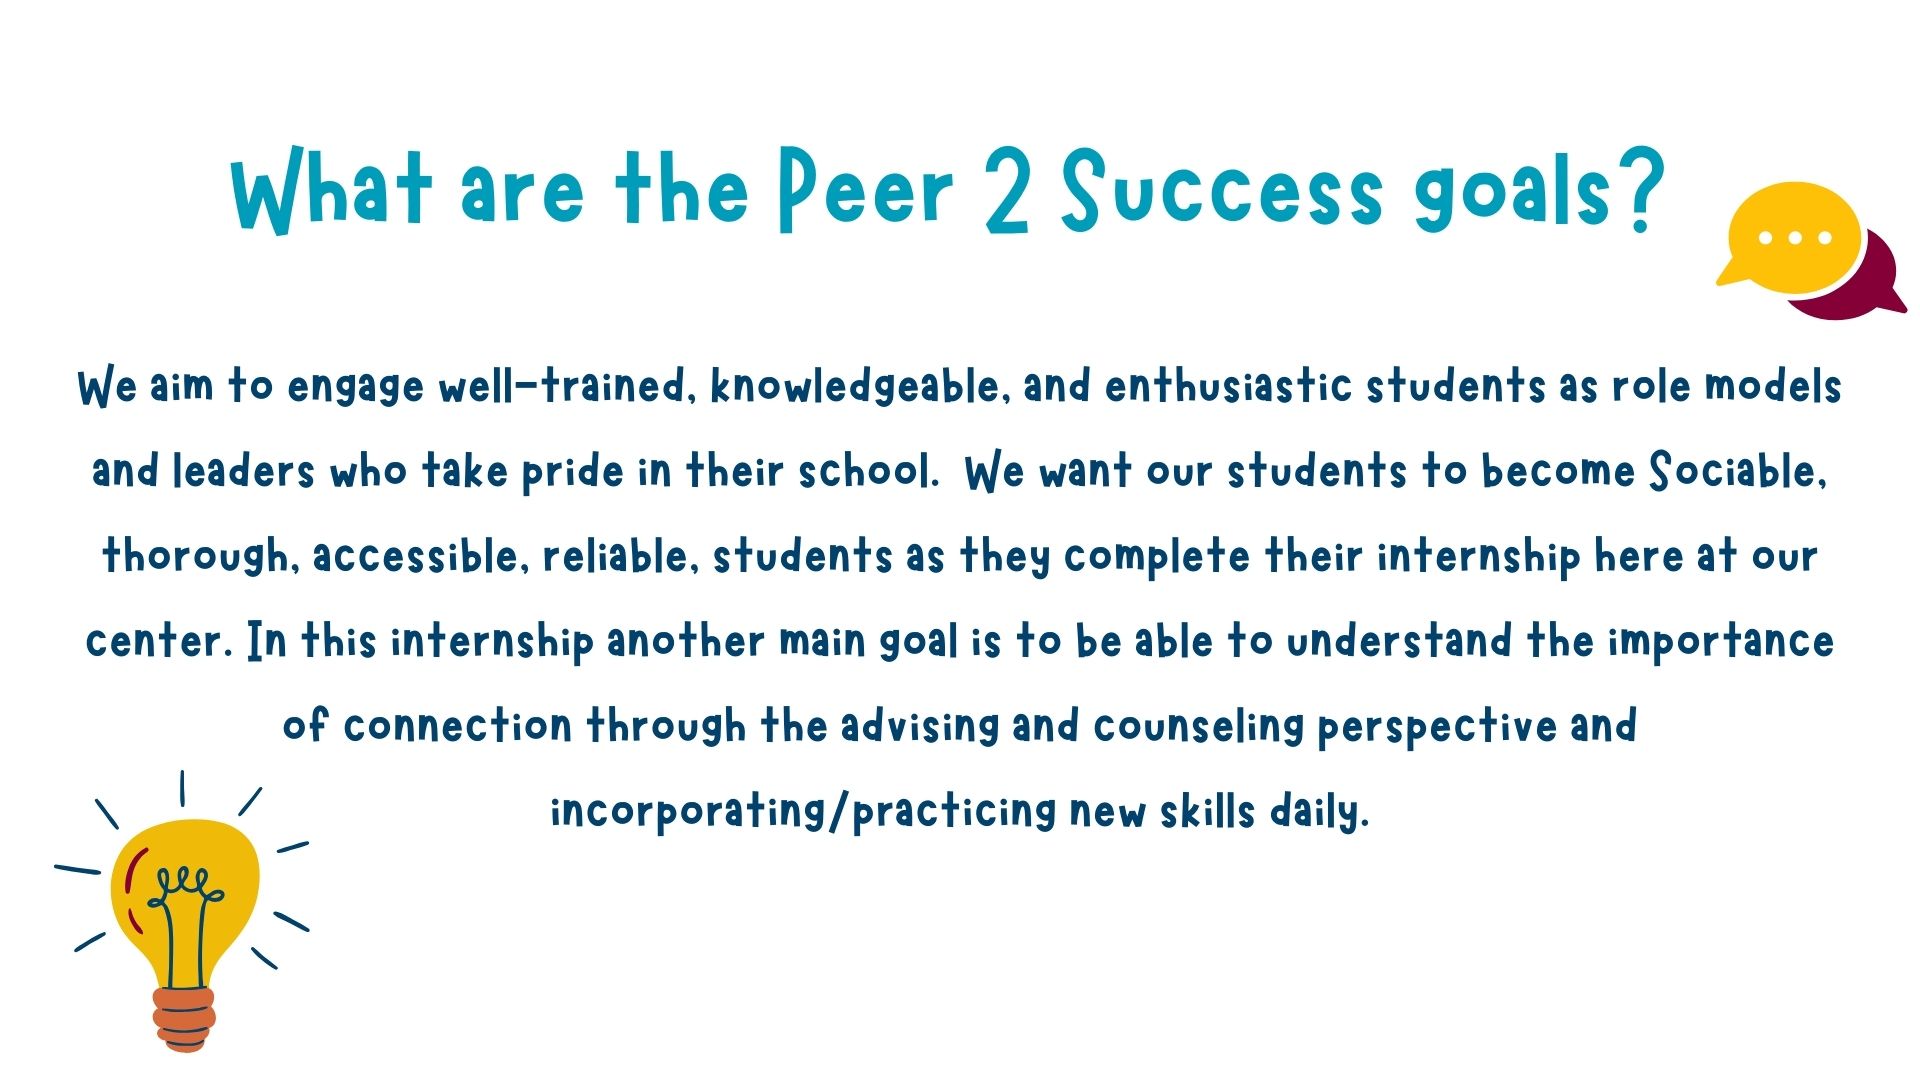 Text explaining the Peer 2 Success goals... engage well trained, knowledgeable, and enthusiastic students as role models.